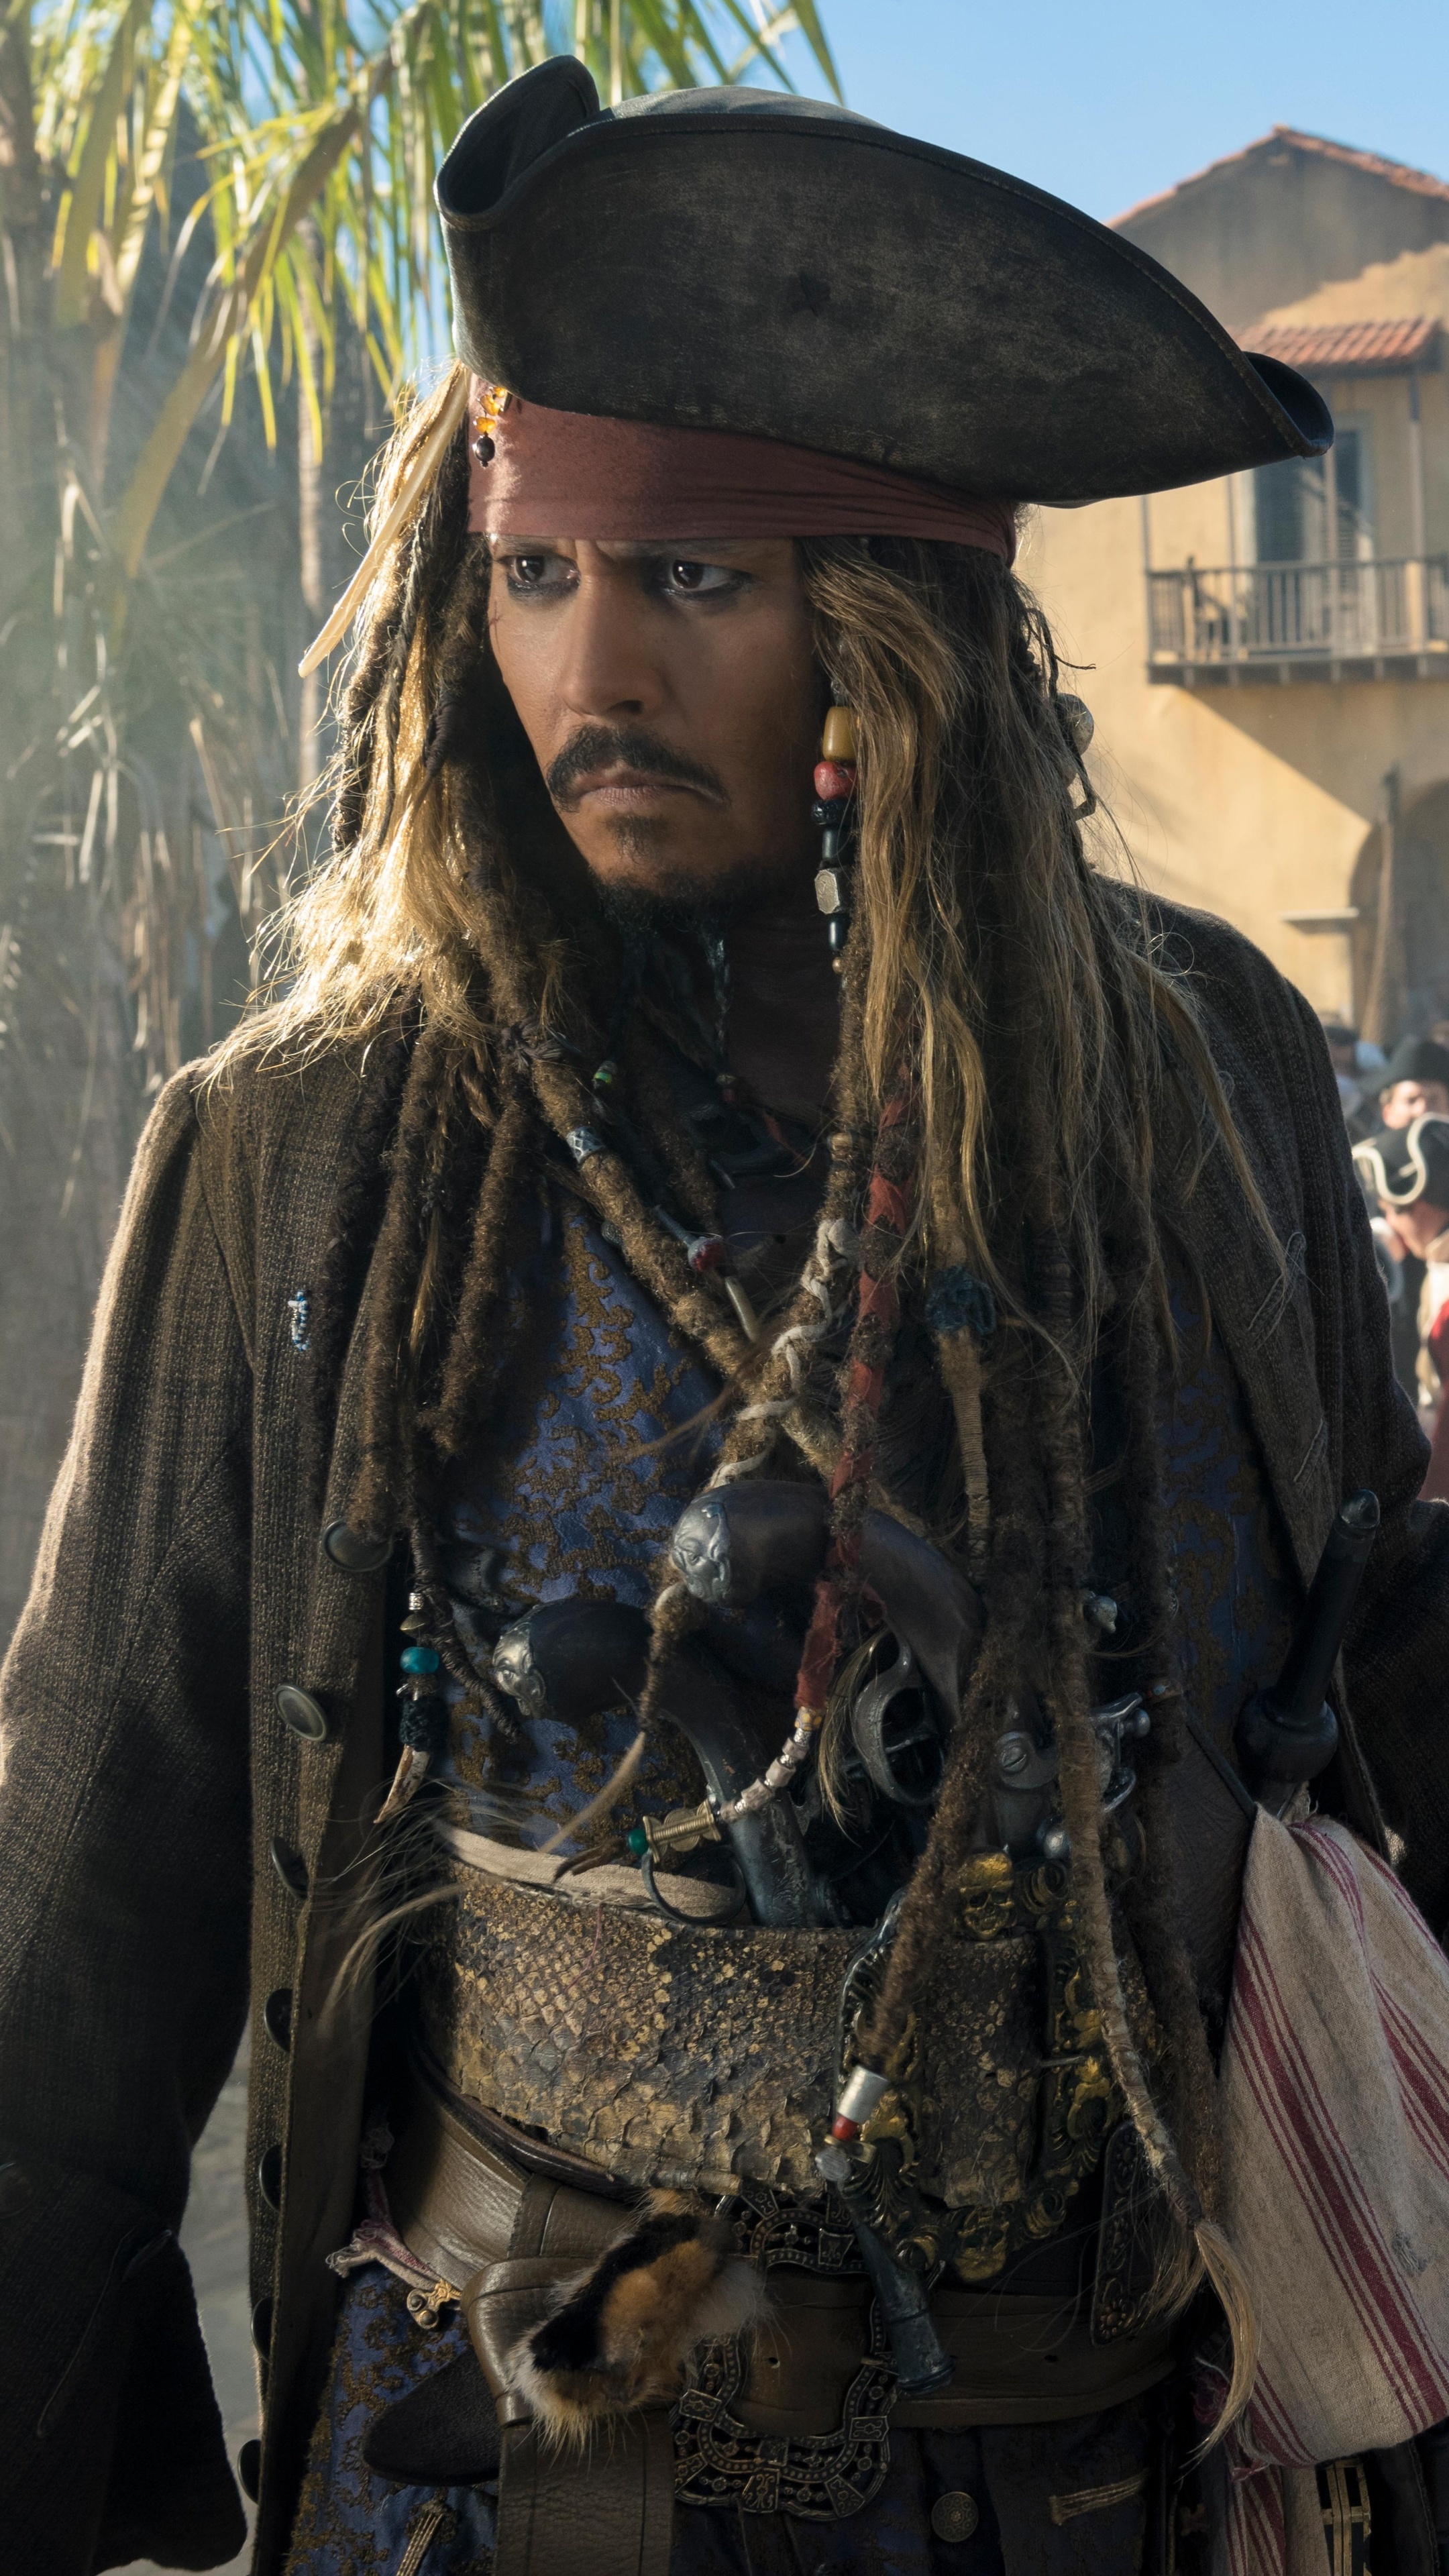 Pirates of the Caribbean: Johnny Depp, The recipient of multiple accolades, including a Golden Globe Award. 2160x3840 4K Background.